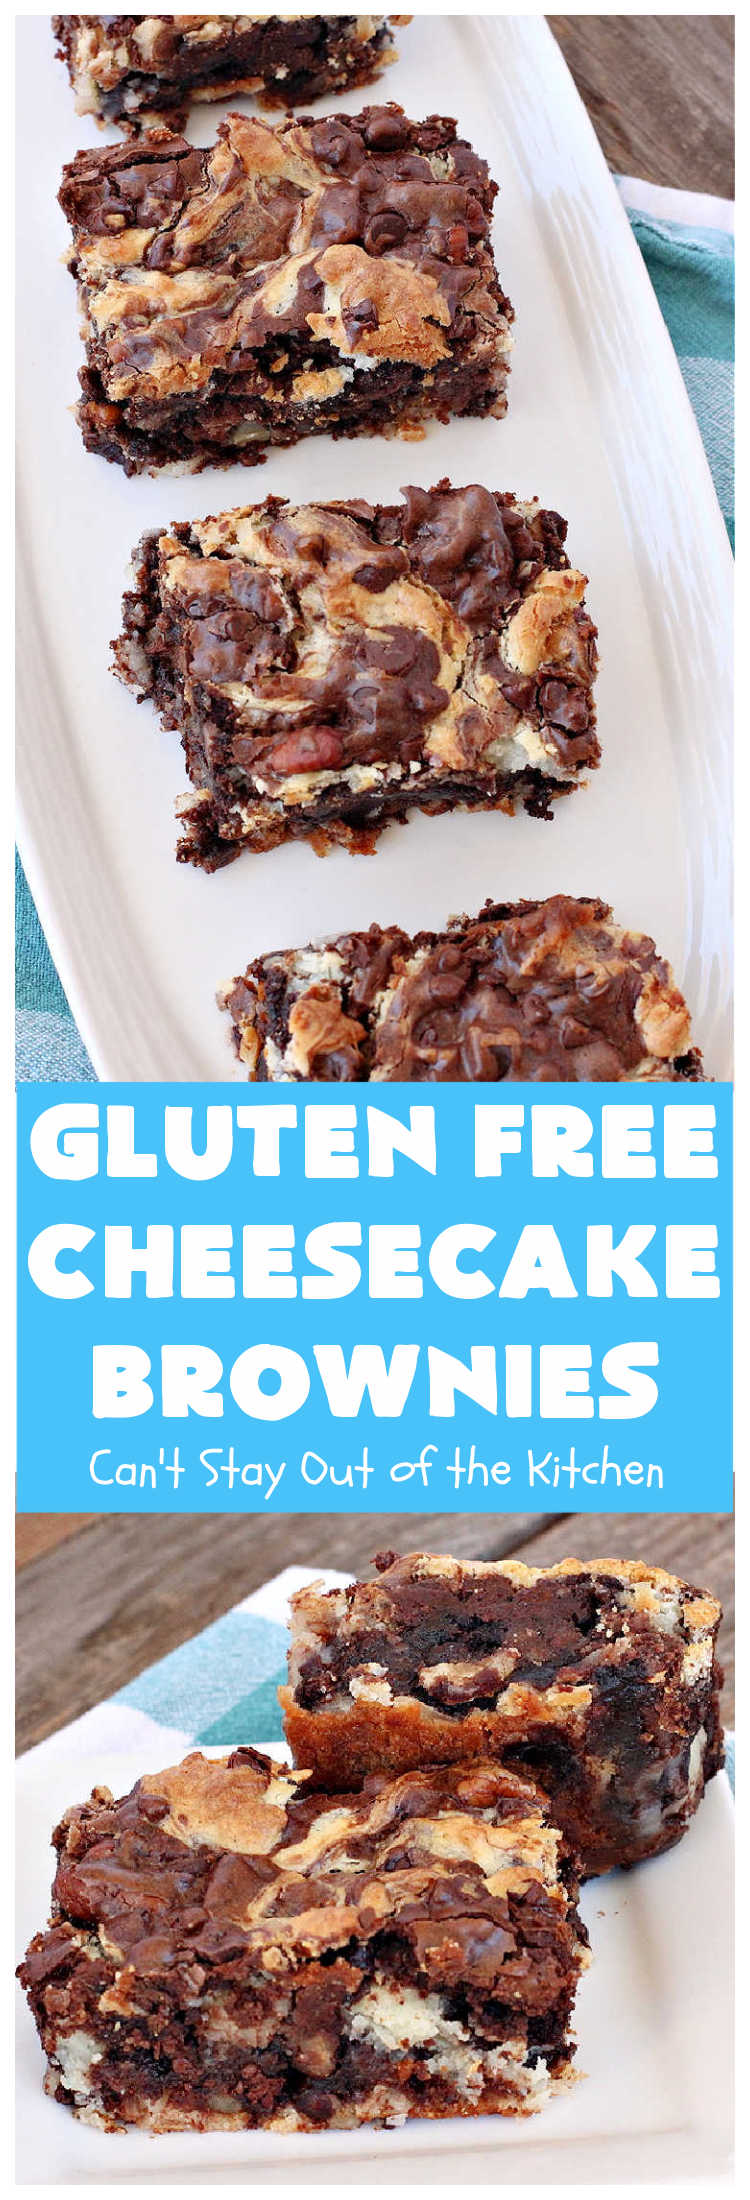 Gluten Free Cheesecake Brownies | Can't Stay Out of the Kitchen | these luscious #brownies have a #cheesecake layer swirled into the batter. They're rich, decadent & divine! On top of that, they're #GlutenFree so you can share them with anyone with gluten intolerance. #dessert #cookie #holiday #HolidayDessert #ChocolateDessert #CheesecakeDessert #coconut #GlutenFreeCheesecakeBrownies